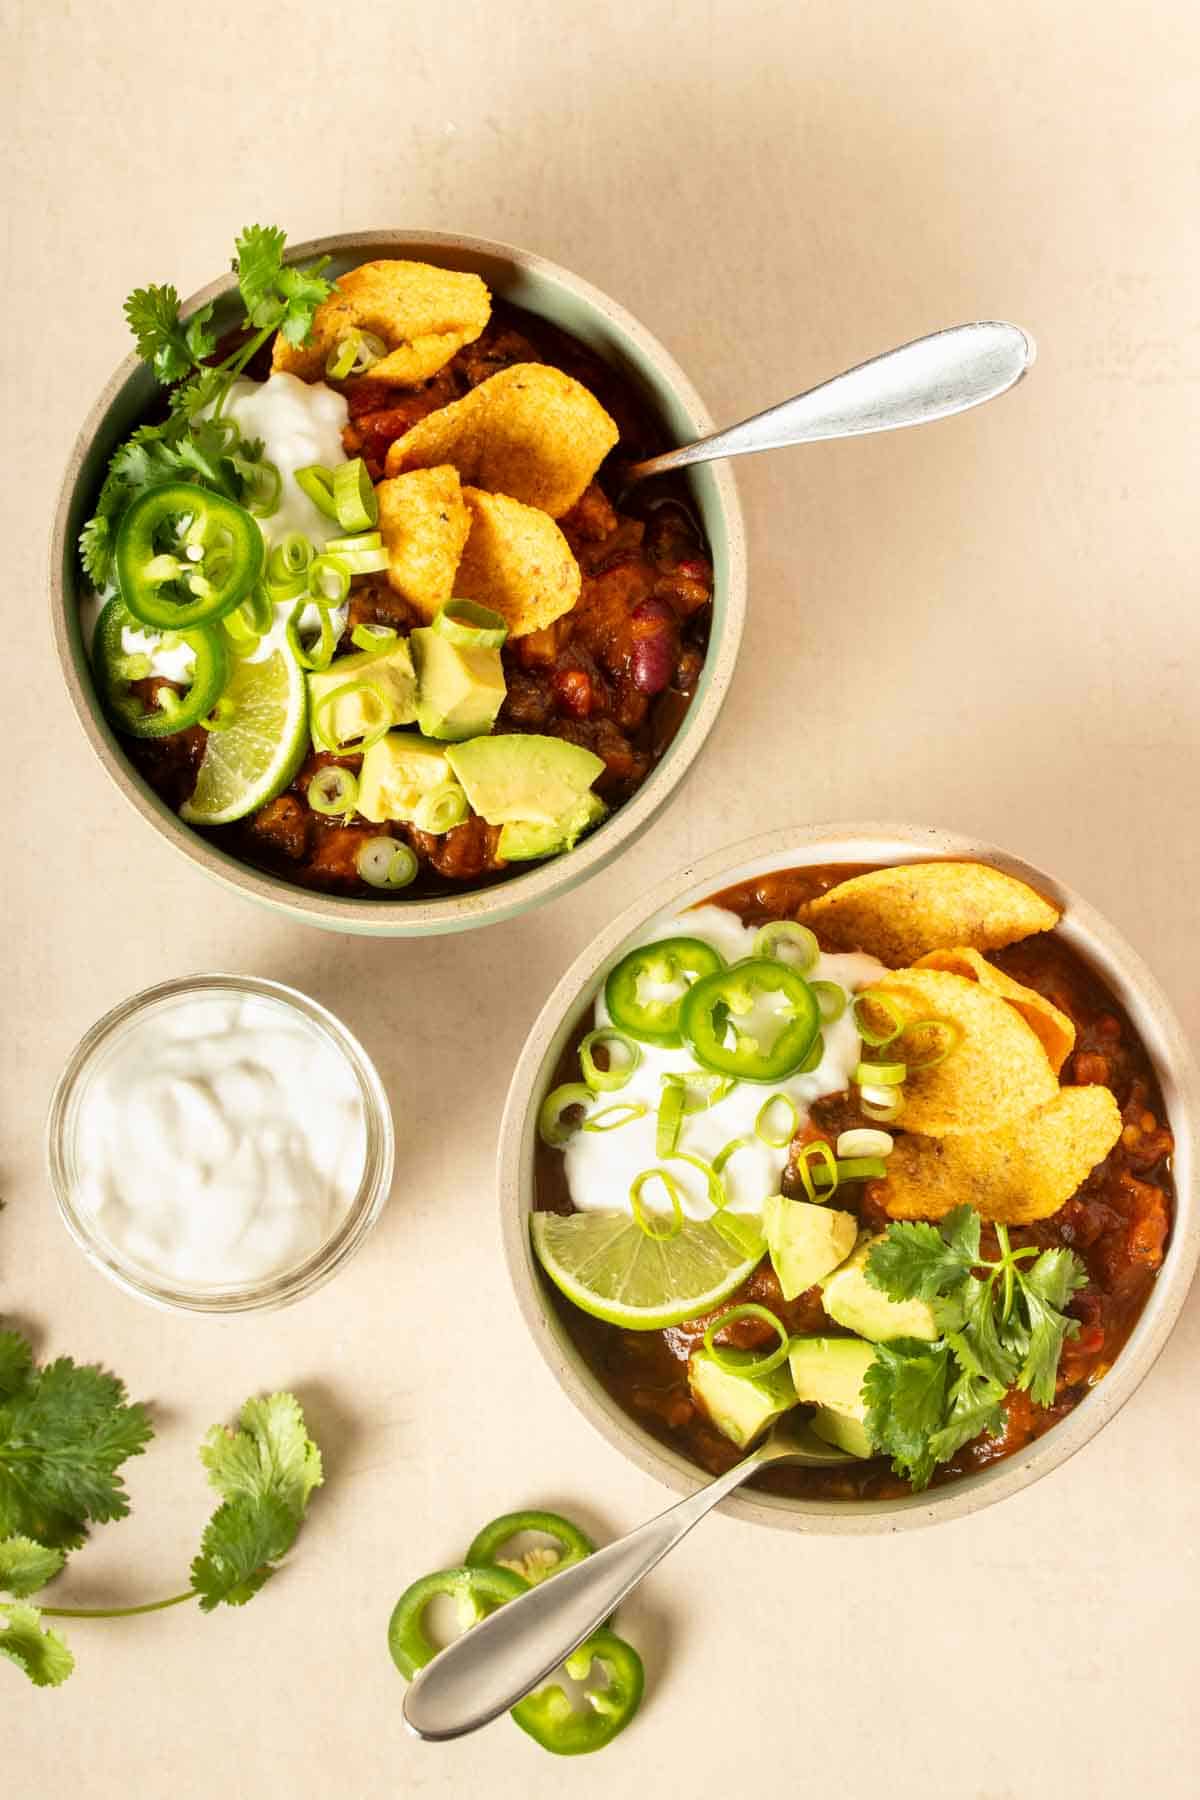 Top view of two bowls filled with chili and topped with corn chips, avocado, lime slice, jalapeno, sour cream and cilantro.